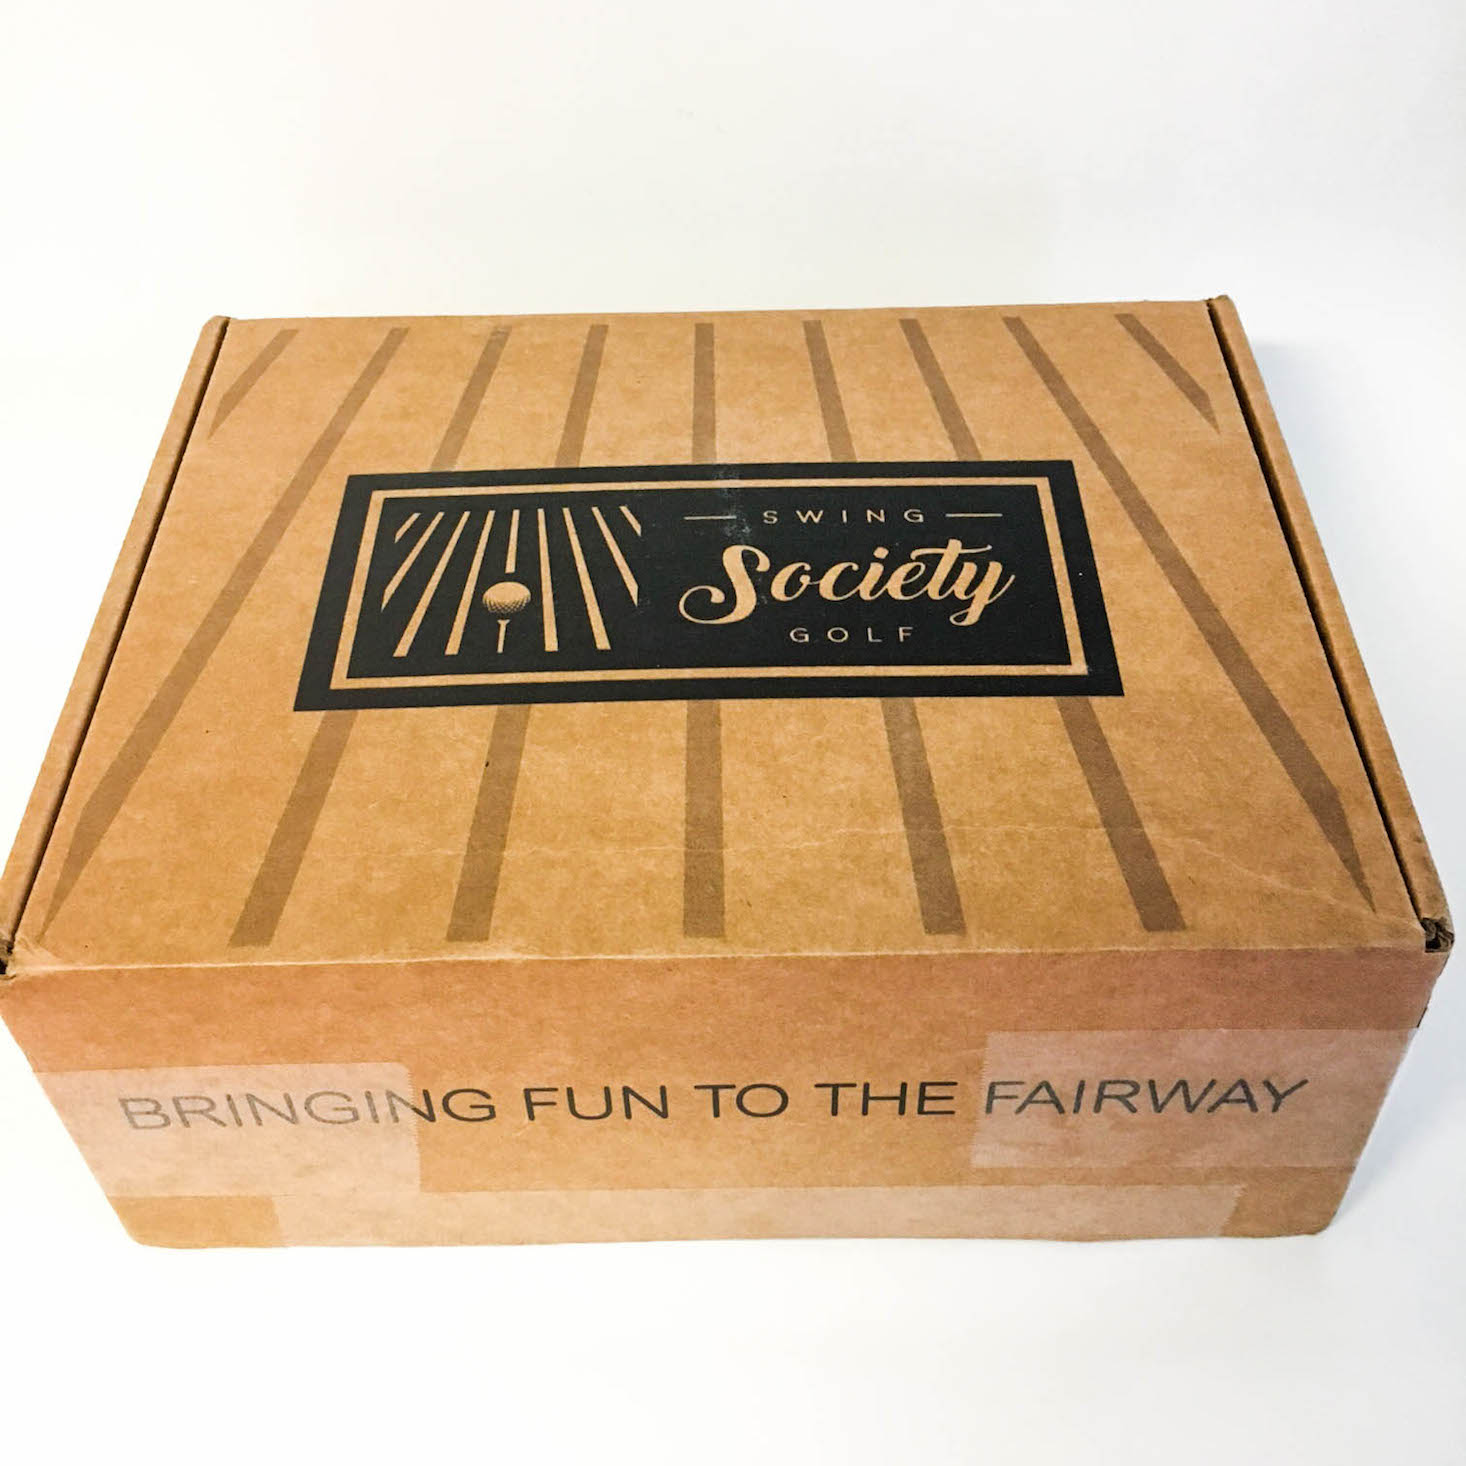 Swing Society Golf Box Review + Coupon – September 2017